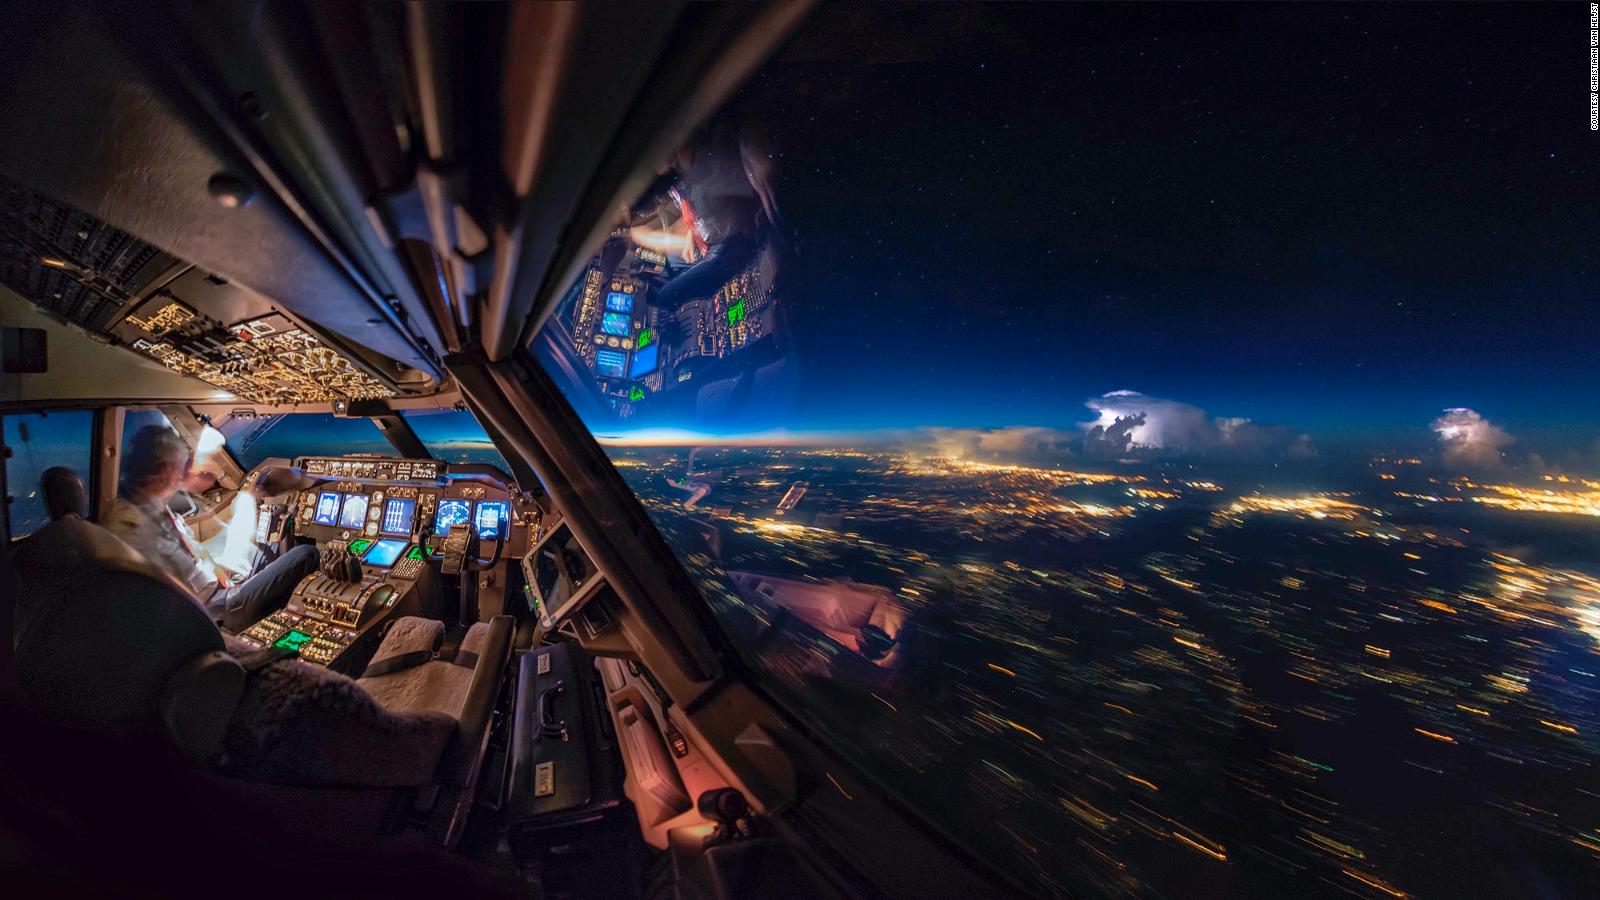 Pilot's spectacular photo taken from an airplane cockpit